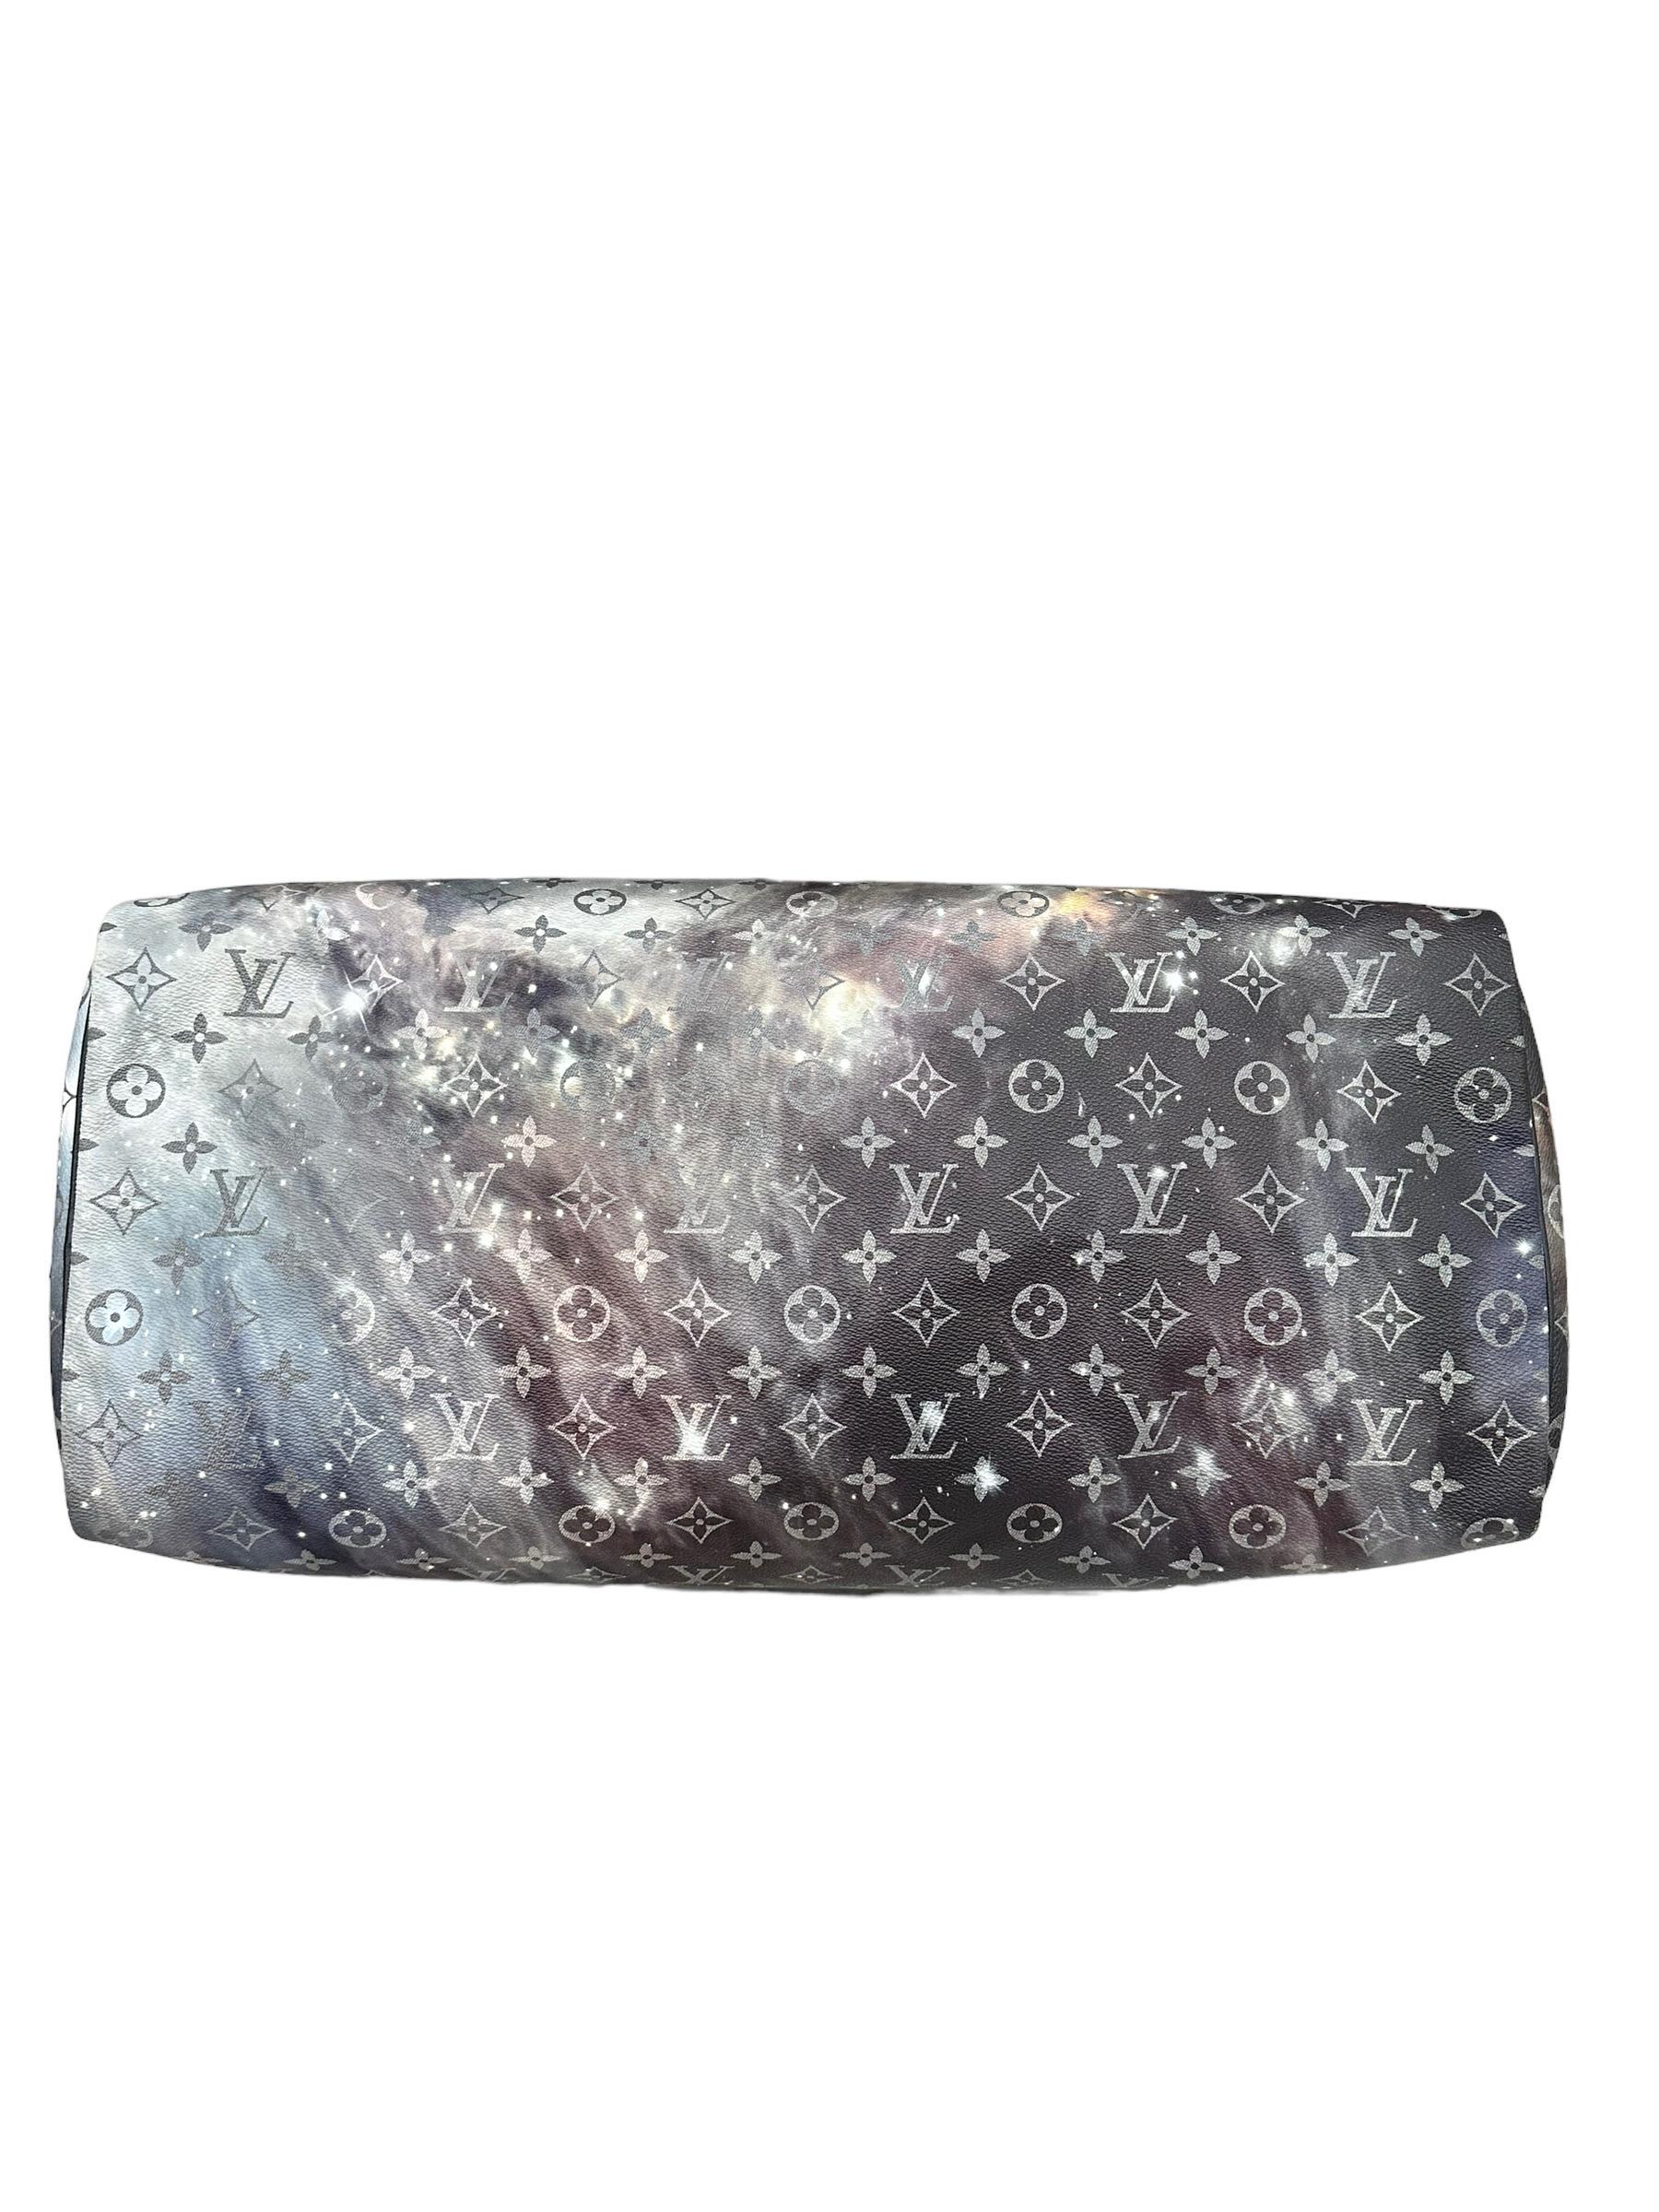 Louis Vuitton Galaxy Keepall Bandouliere 50 Limited Edition Travel Bag For Sale 10